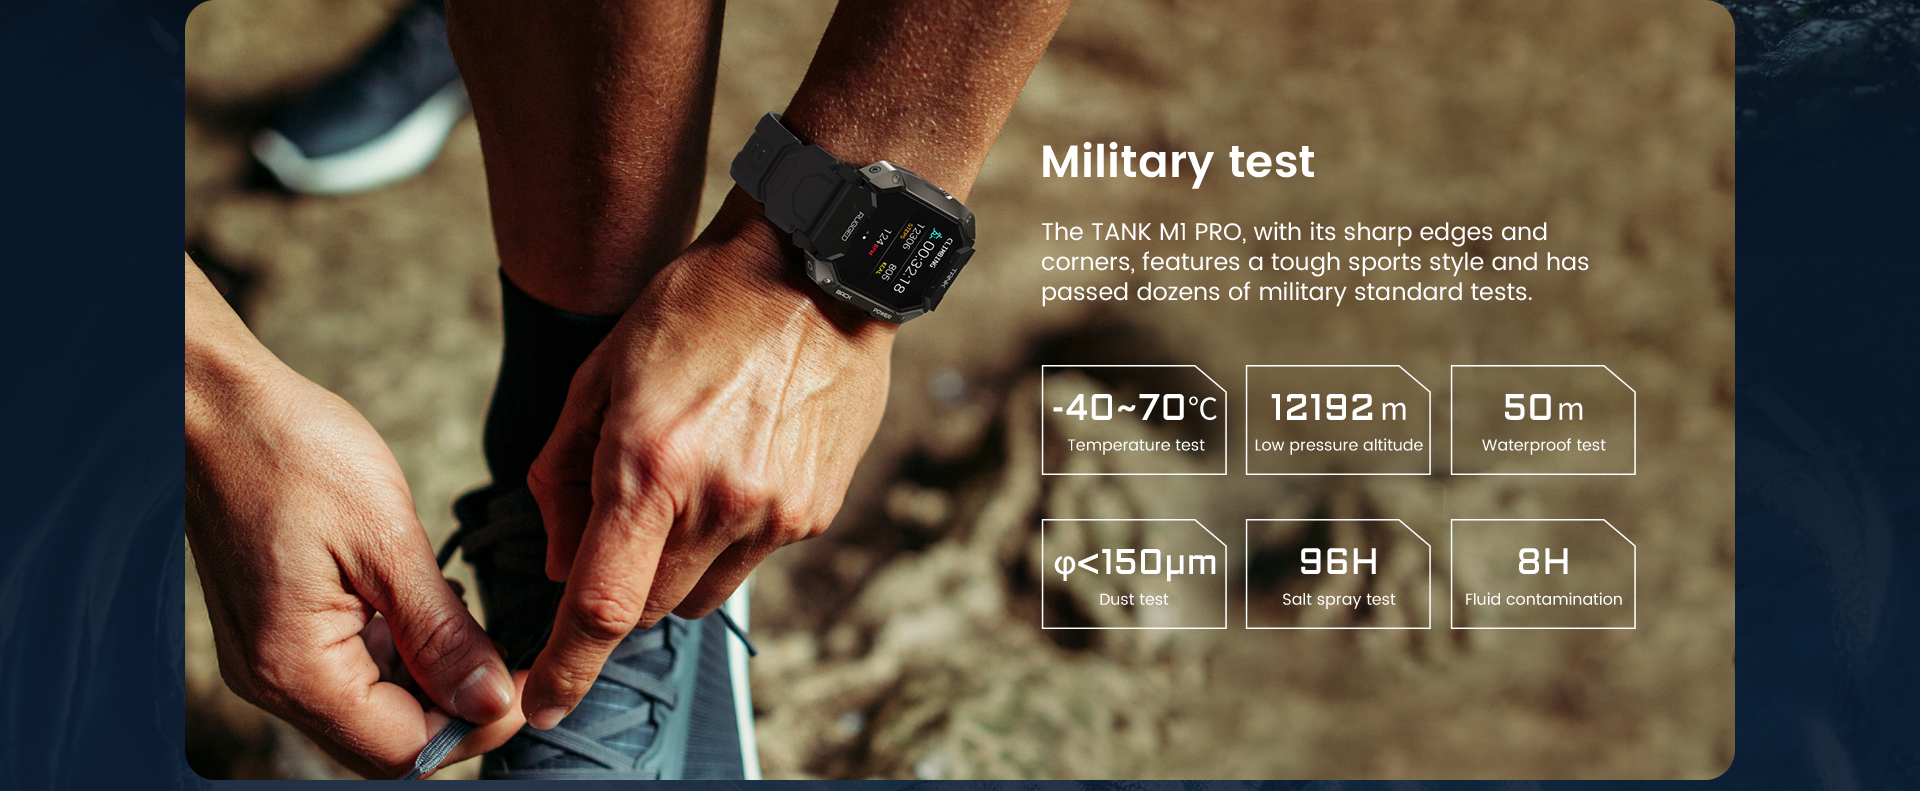 KOSPET-TANK-M1-Pro-Three-proof-Rugged-Outdoor-Fitness-Tracker-bluetooth-Call-24h-Heart-Rate-SpO2-Mon-1968724-4